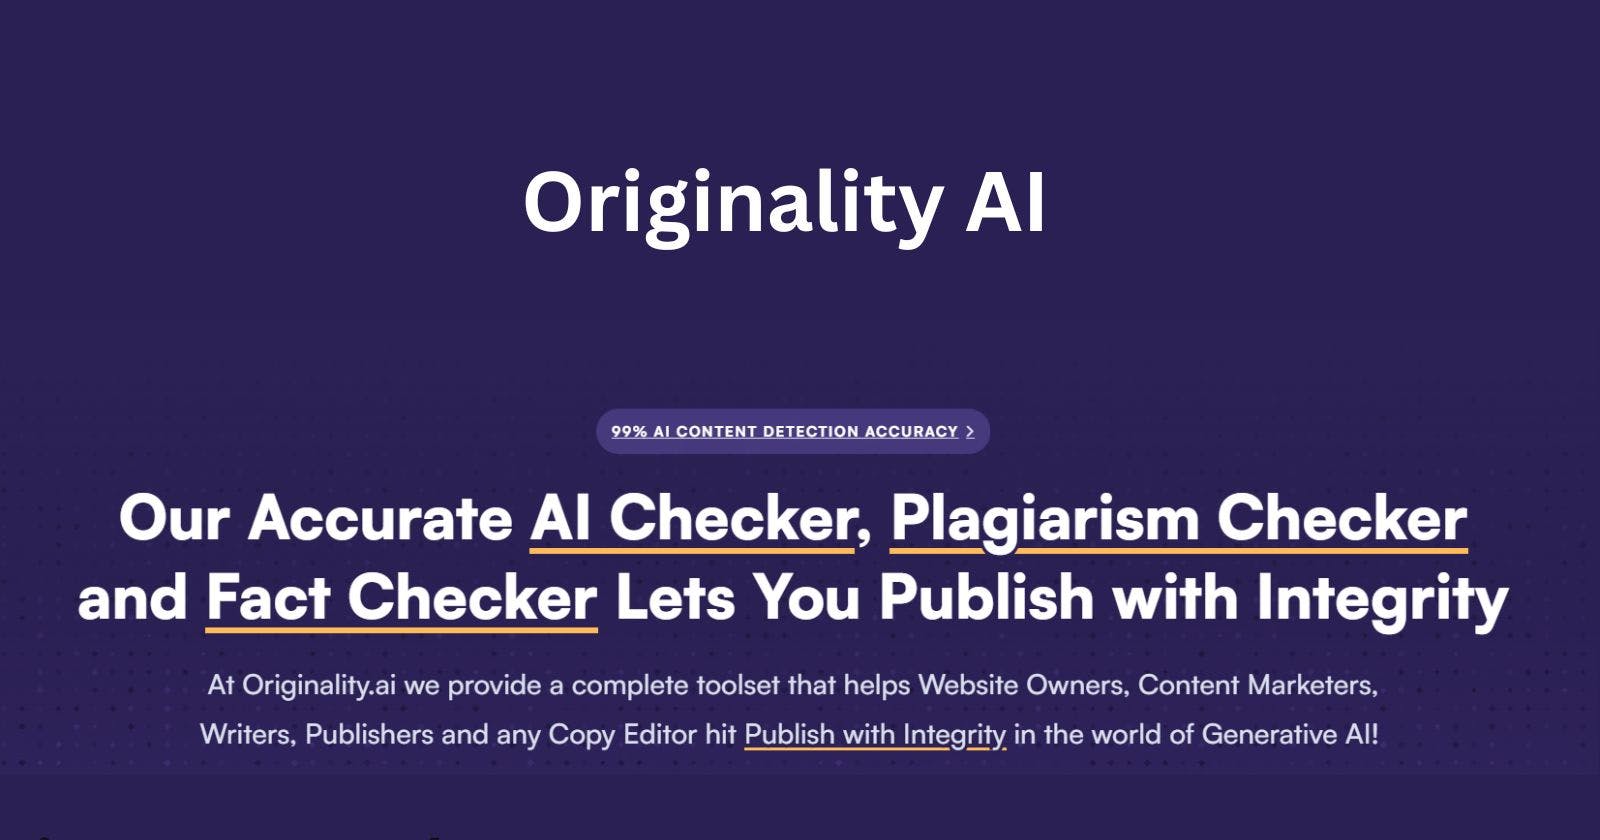 What is Originality AI and Why Does it Matter?